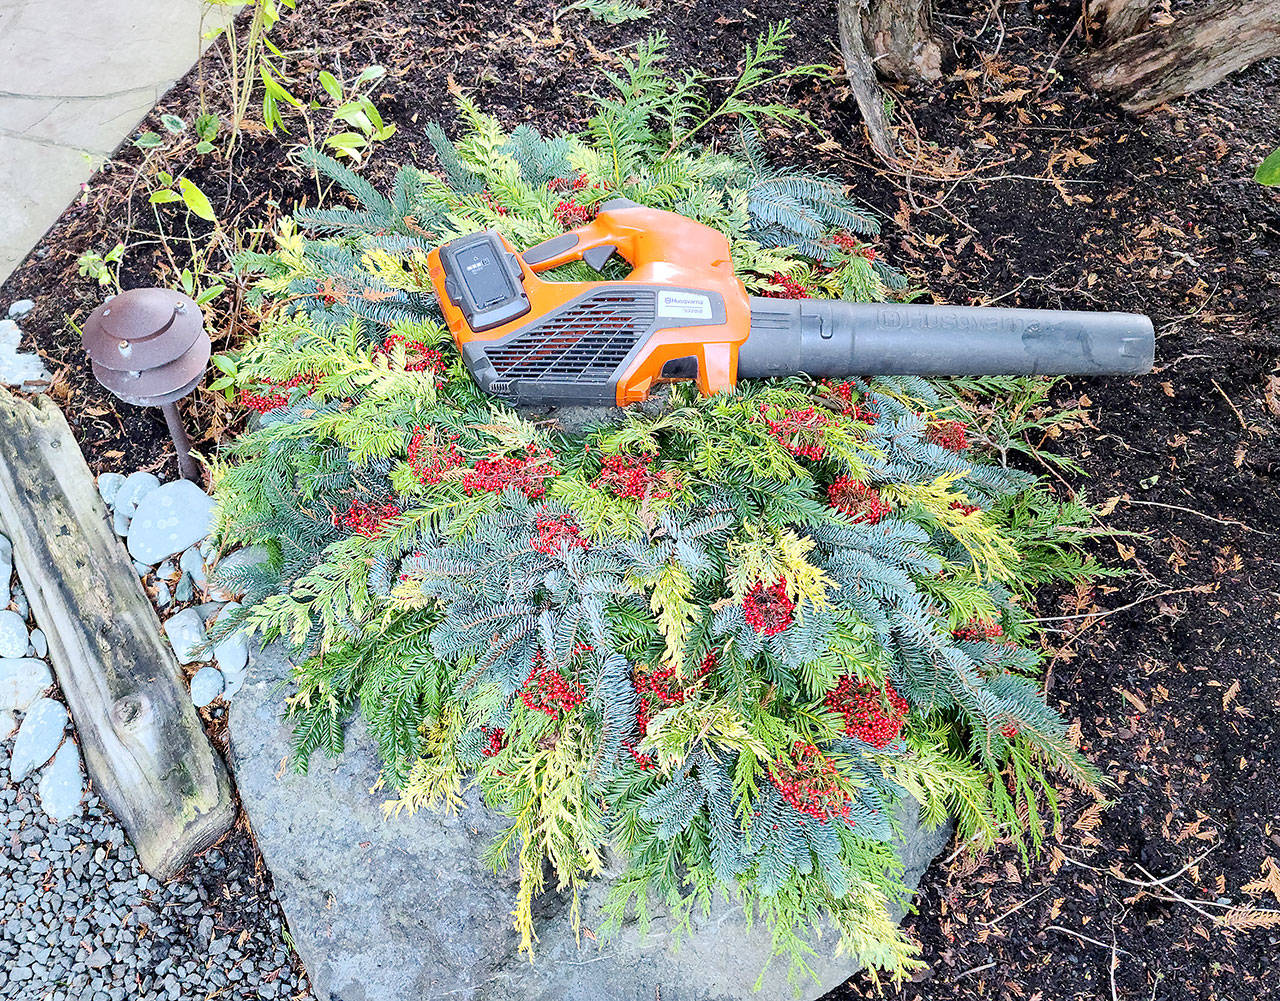 My electric blower — which is not only far quieter than a Whidby Island Growler, but also is vastly better for the environment than gas blowers. We, as gardeners, should be stewards of the land. (Andrew May/For Peninsula Daily News)